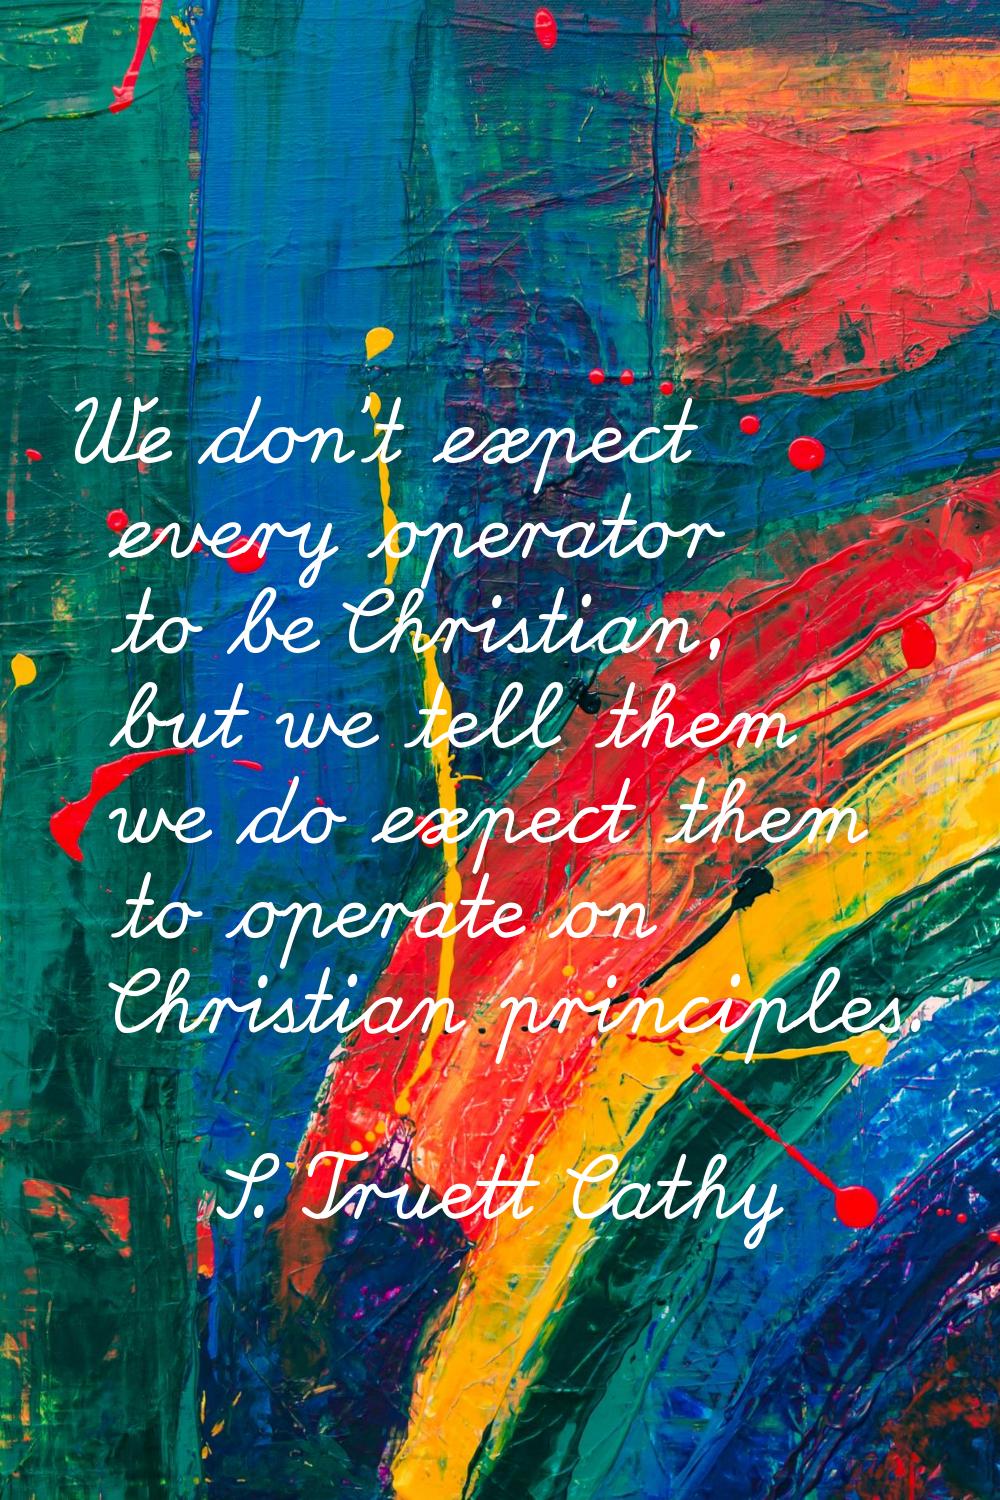 We don't expect every operator to be Christian, but we tell them we do expect them to operate on Ch